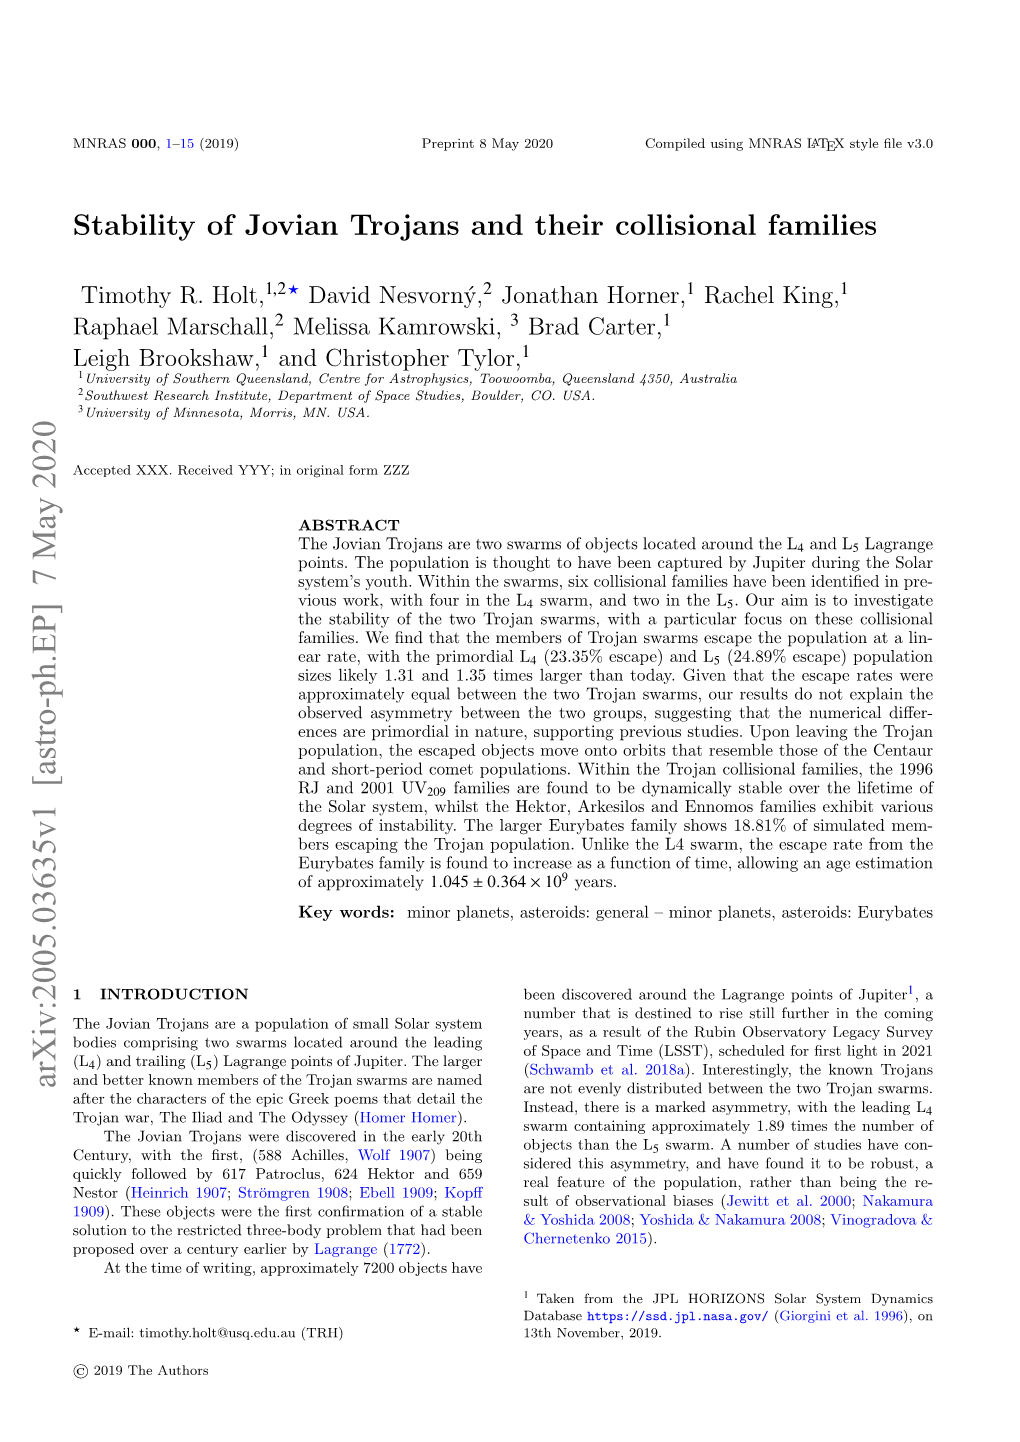 Stability of Jovian Trojans and Their Collisional Families